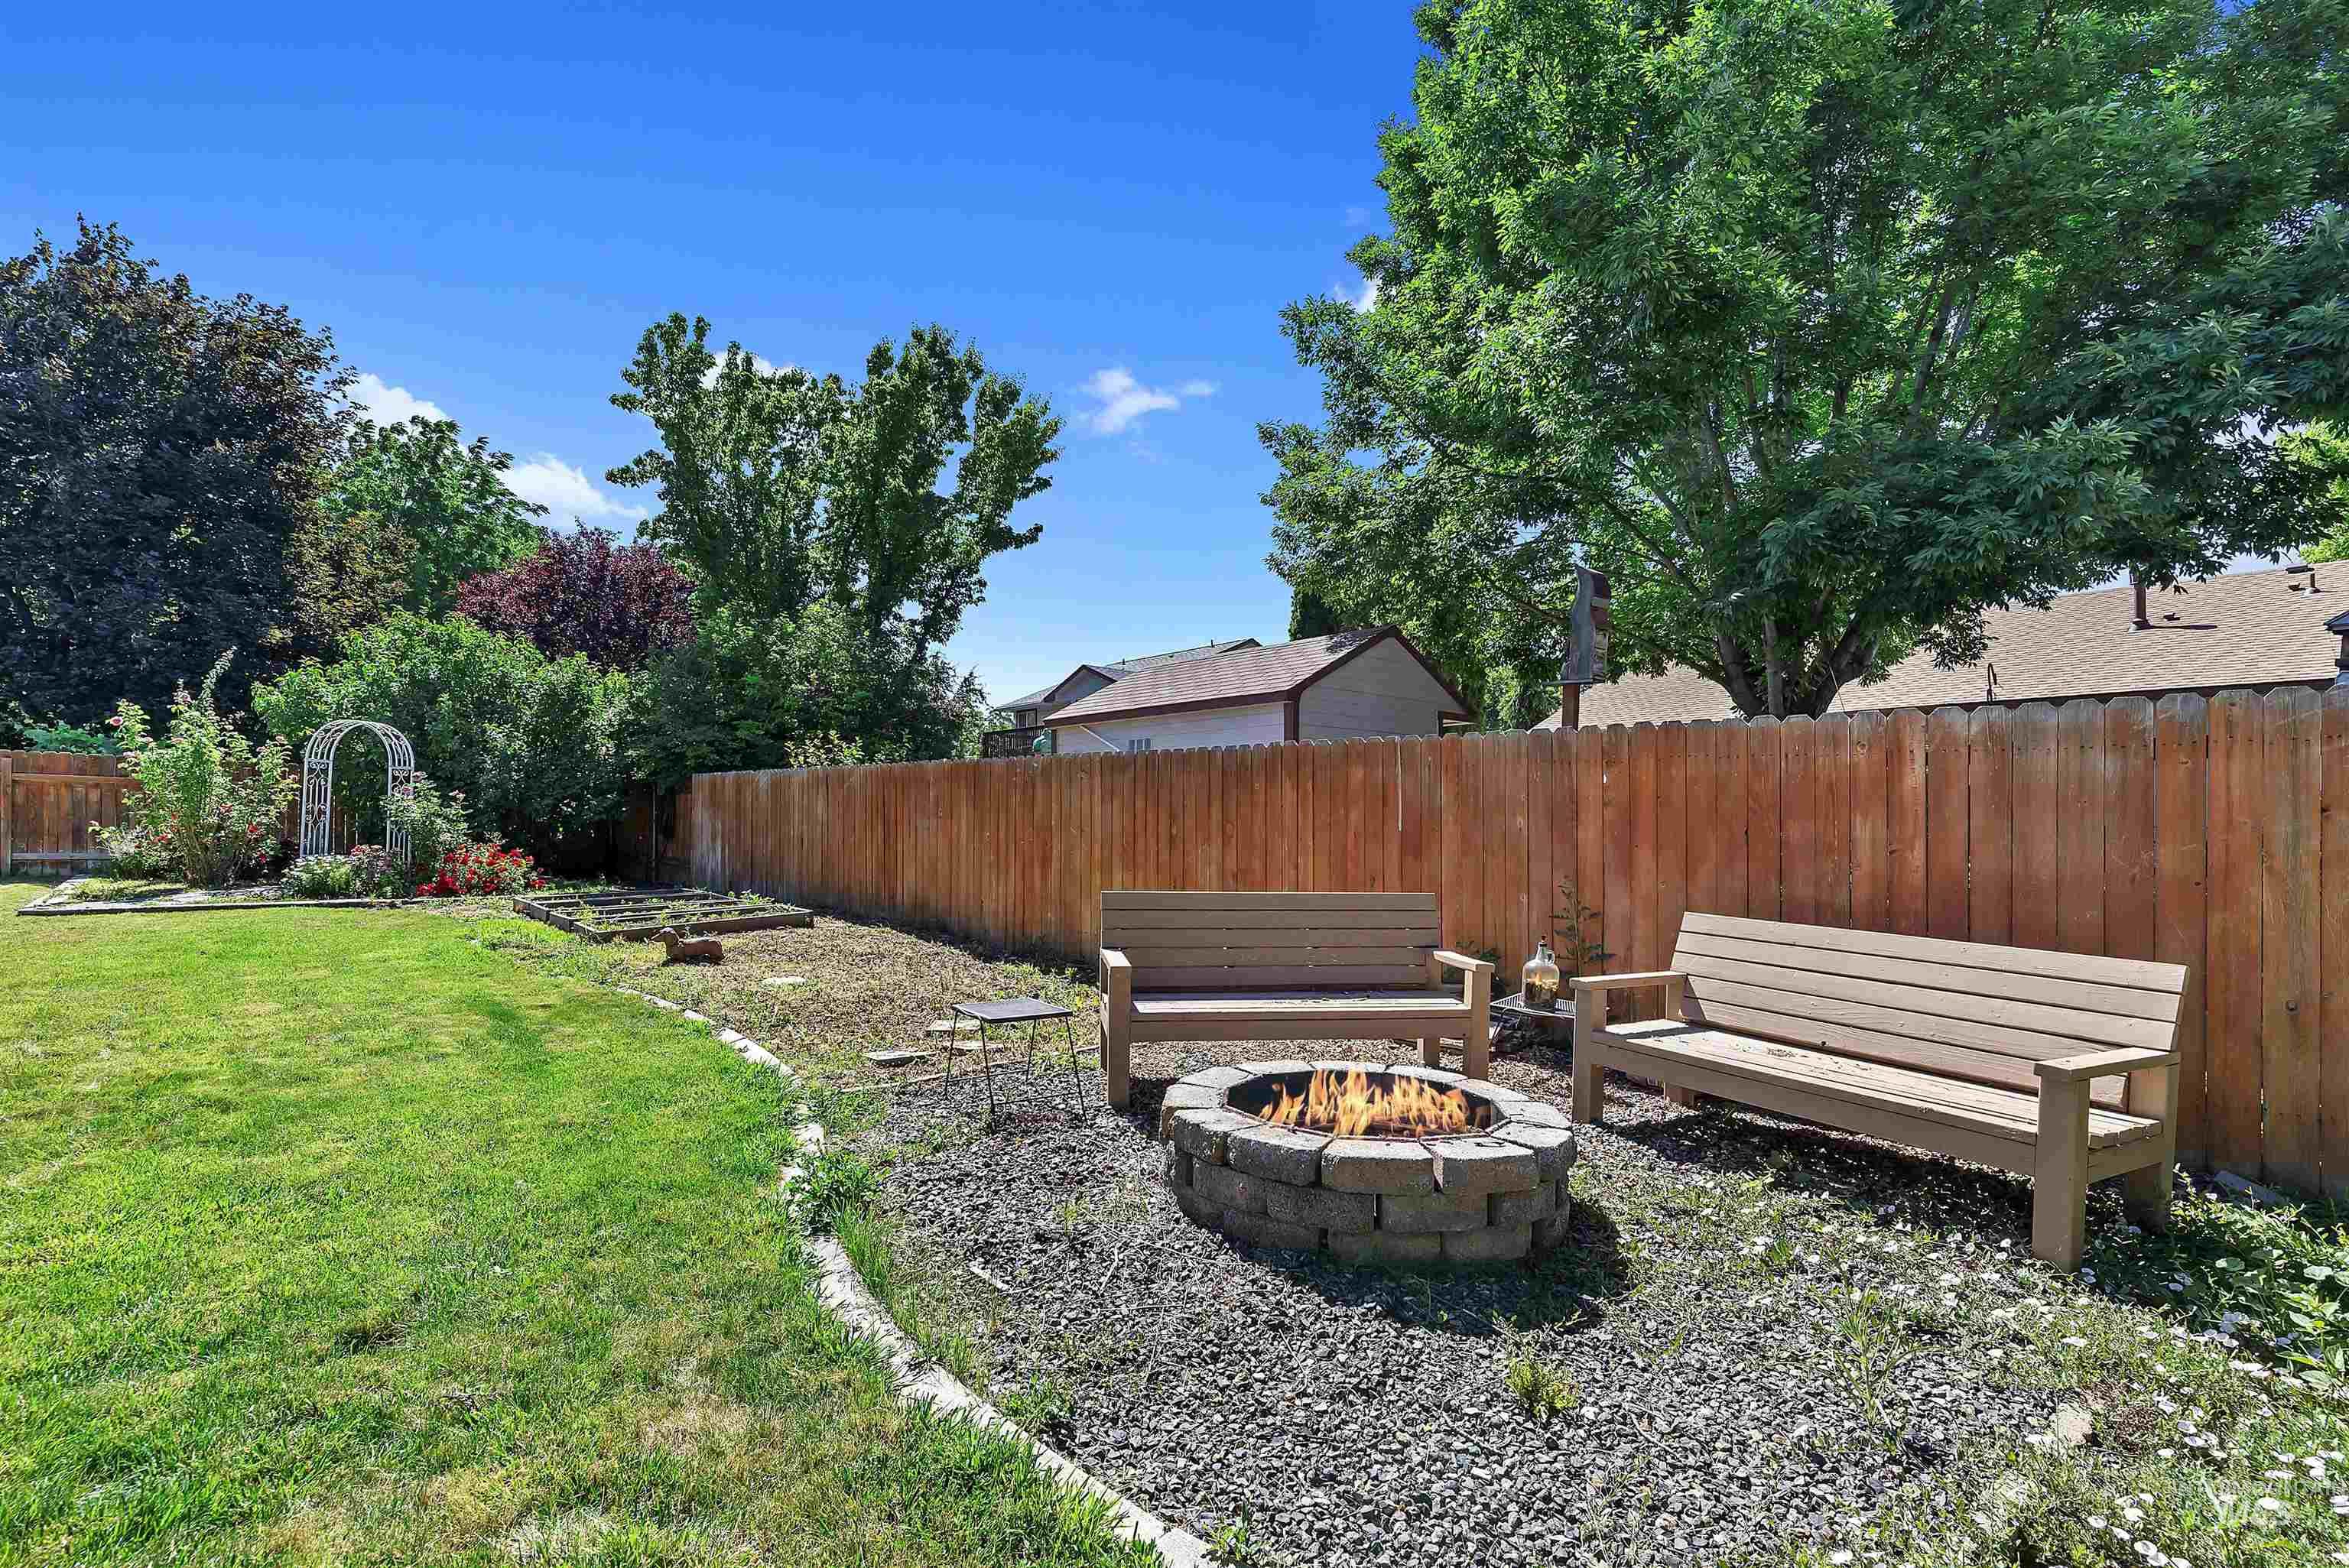 2015 E Three Bars Dr., Meridian, Idaho 83642-4521, 3 Bedrooms, 2 Bathrooms, Residential For Sale, Price $450,000,MLS 98849226